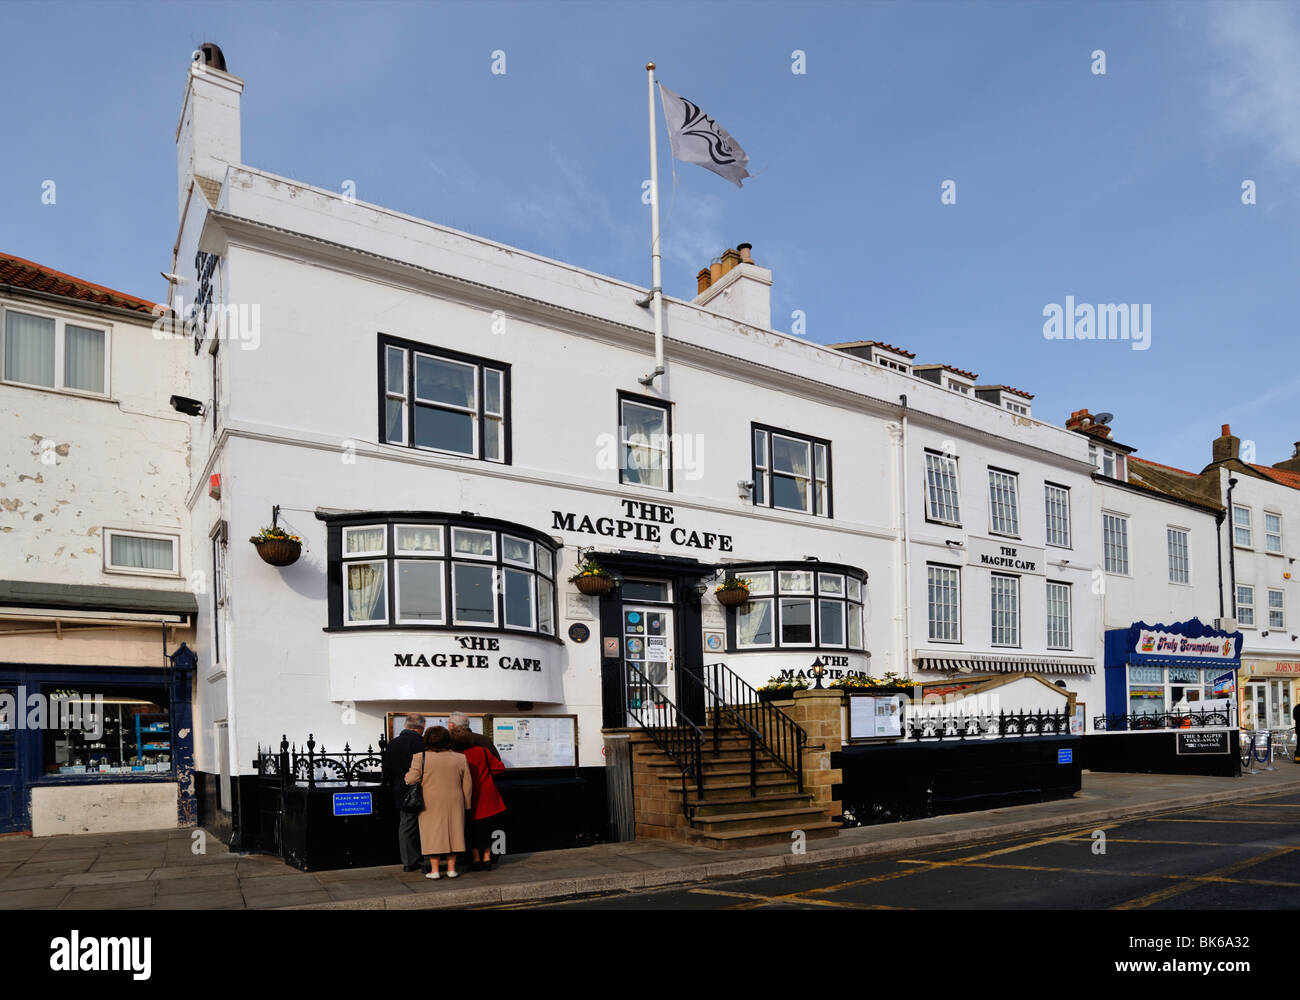 WHITBY, NORTH YORKSHIRE, UK - MARCH 17, 2010:  Exterior view of the Magpie Cafe Fish and Chip Restaurant Stock Photo